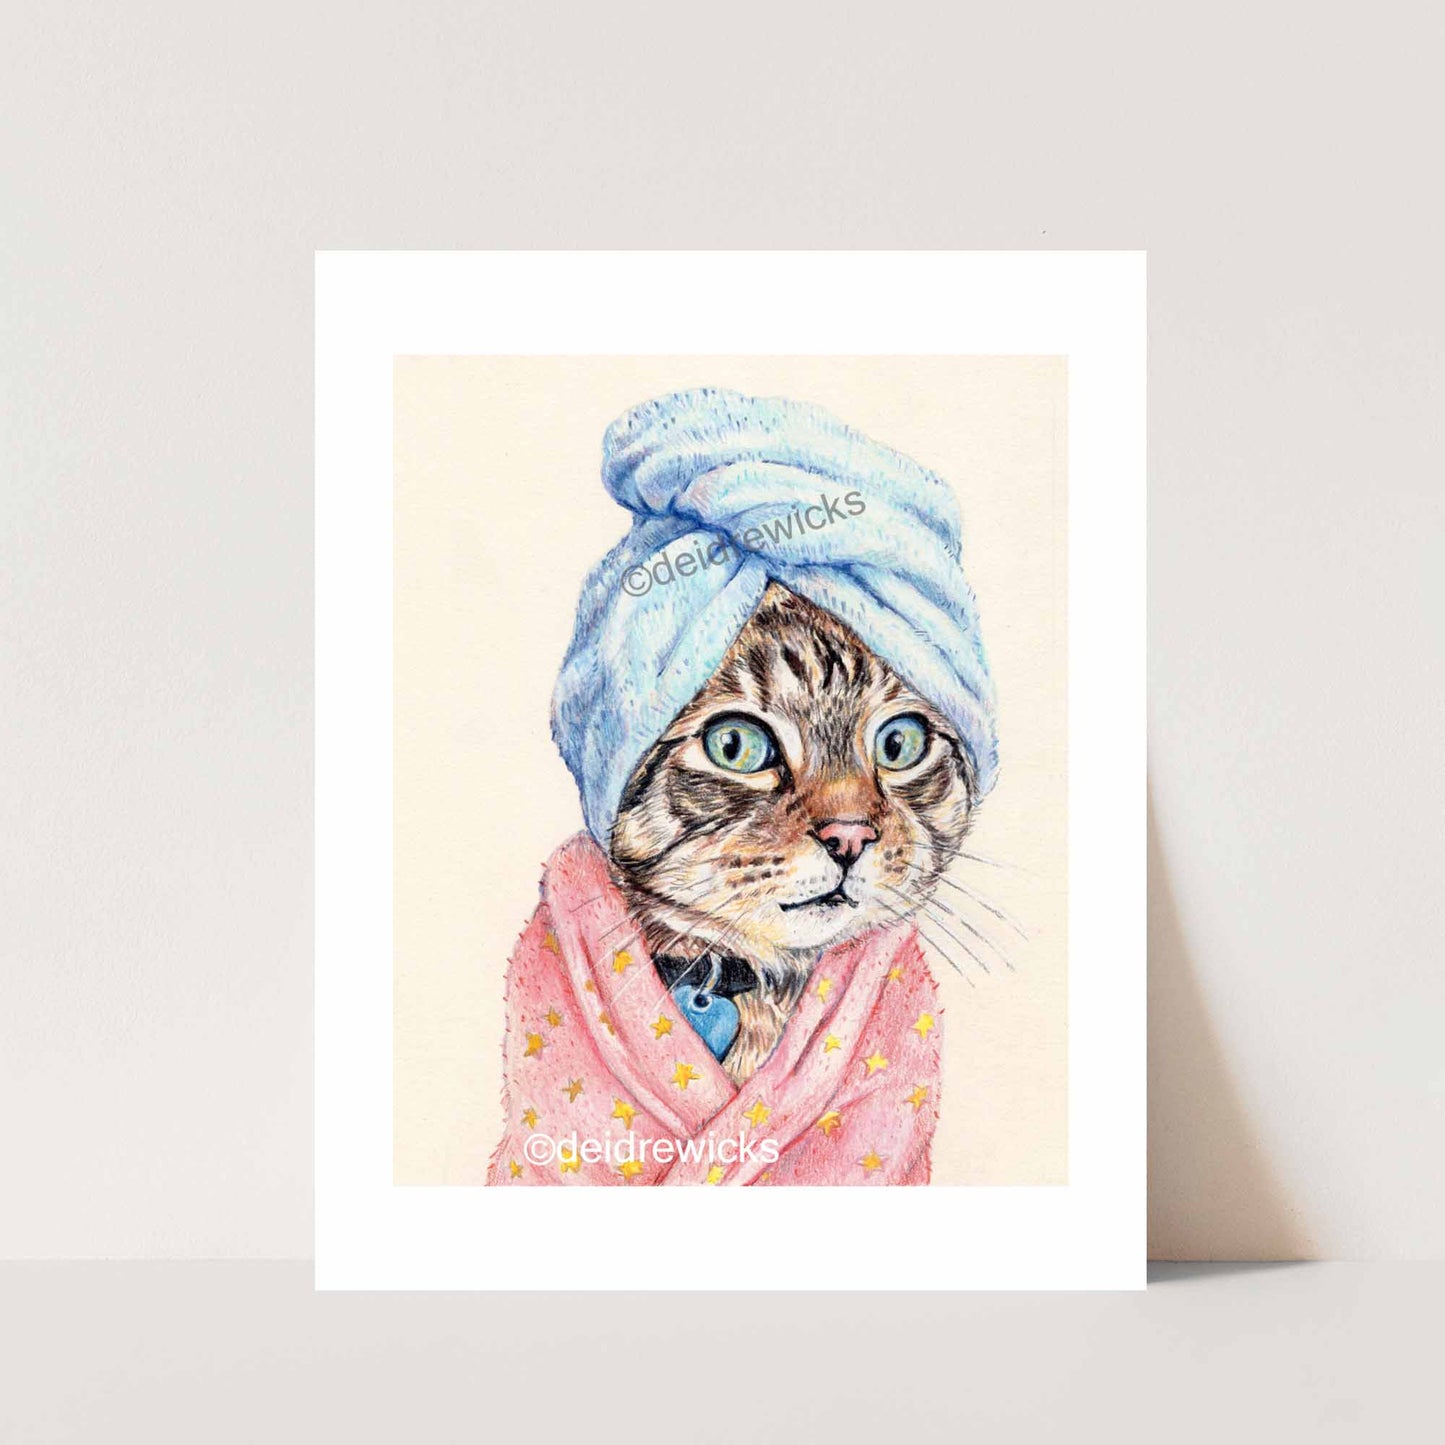 Print of a colored pencil drawing of a tabby cat wearing a pink bathrobe and blue bath towel. Original art by Deidre WIcks